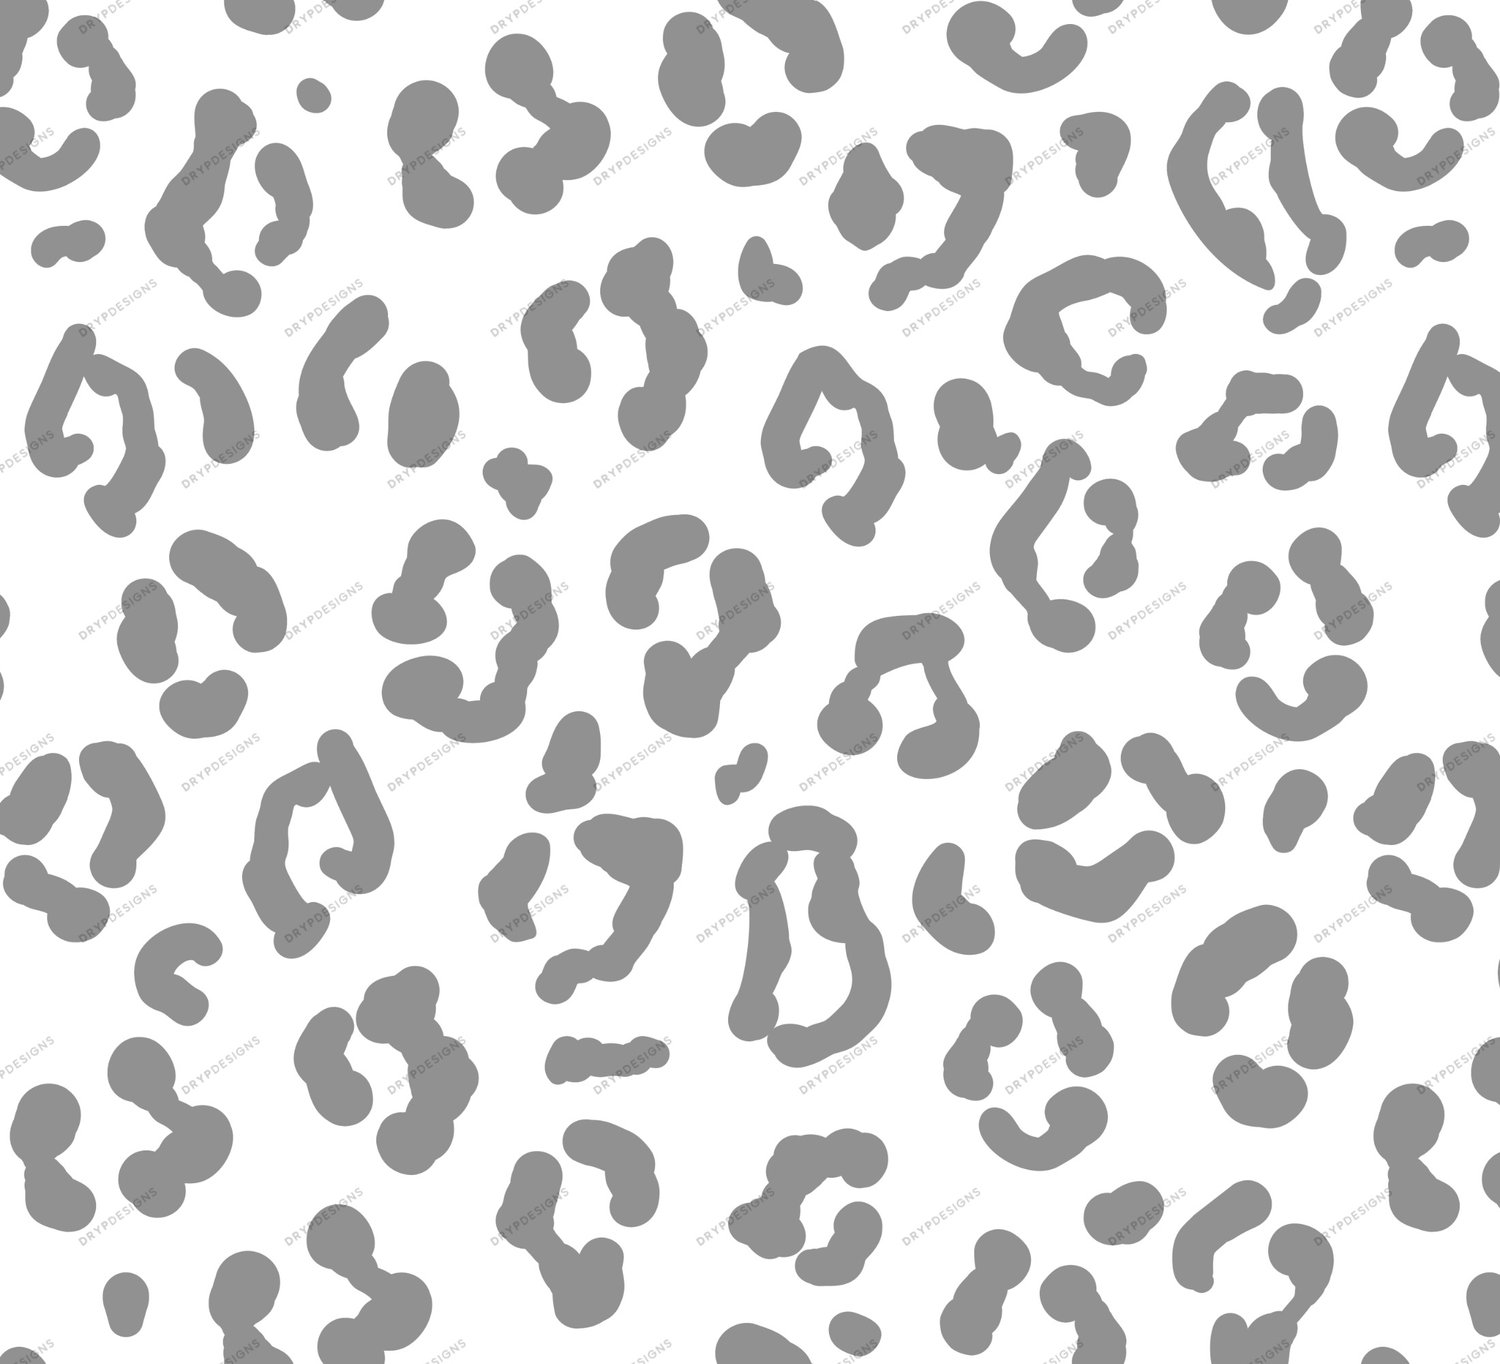 leopard-print-images-free-download-on-clipart-library-clip-art-library